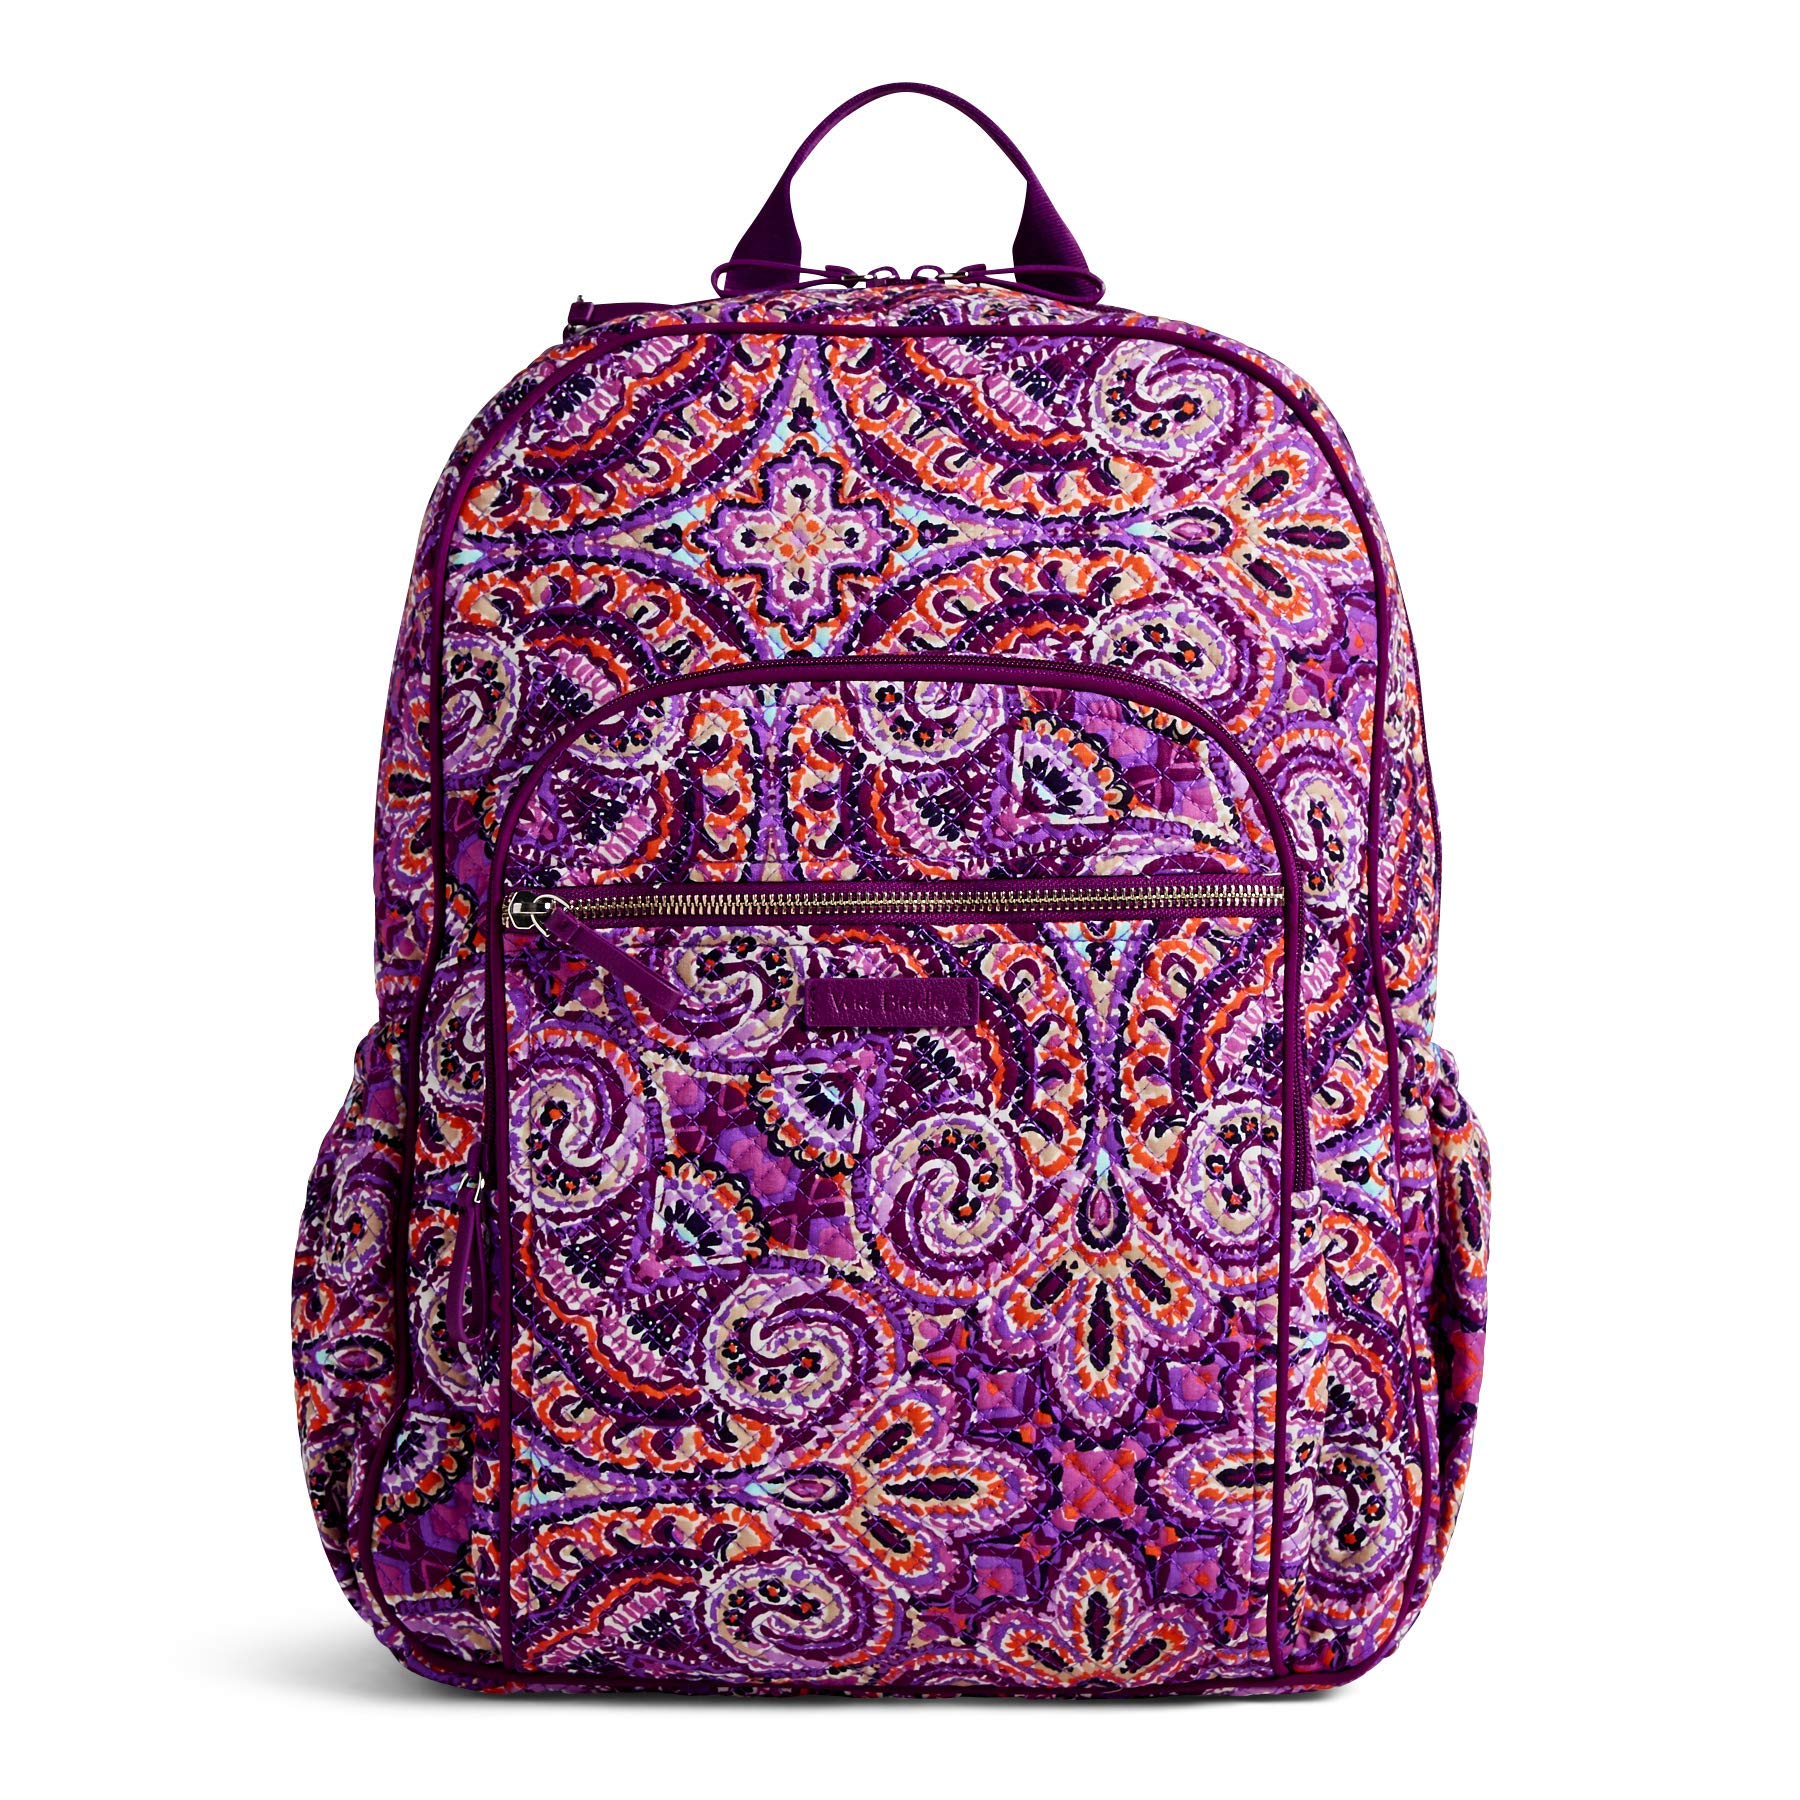 Vera Bradley Essential Compact Backpack, Tropics Tapestry, Personalized,  Monogram or Name, Embroidered, Custom -  Finland